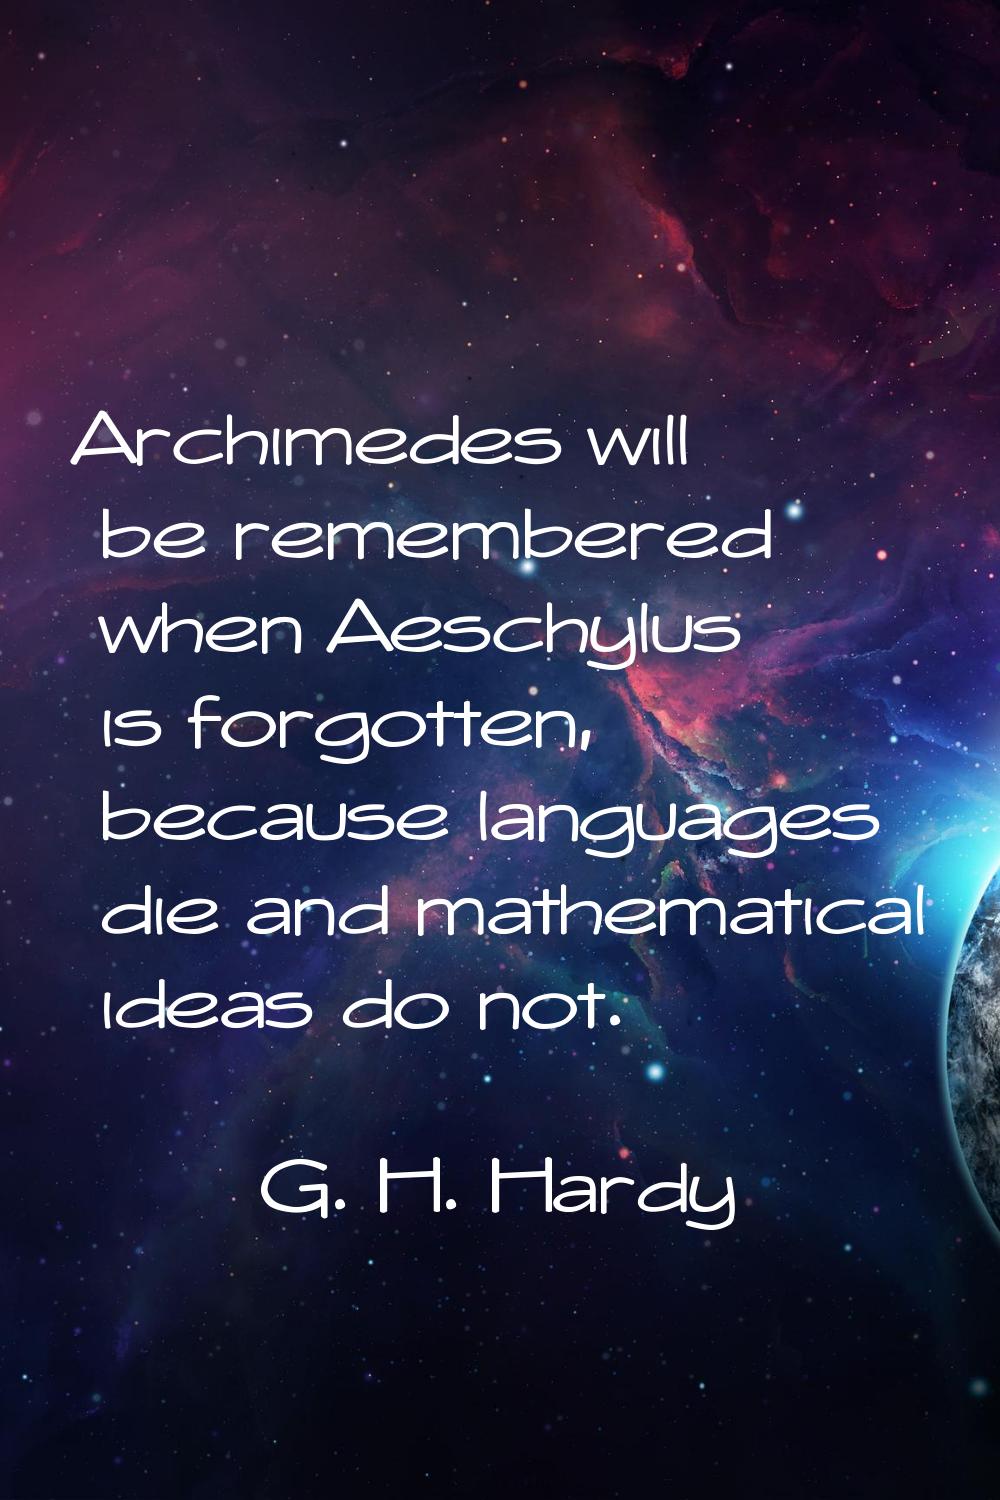 Archimedes will be remembered when Aeschylus is forgotten, because languages die and mathematical i